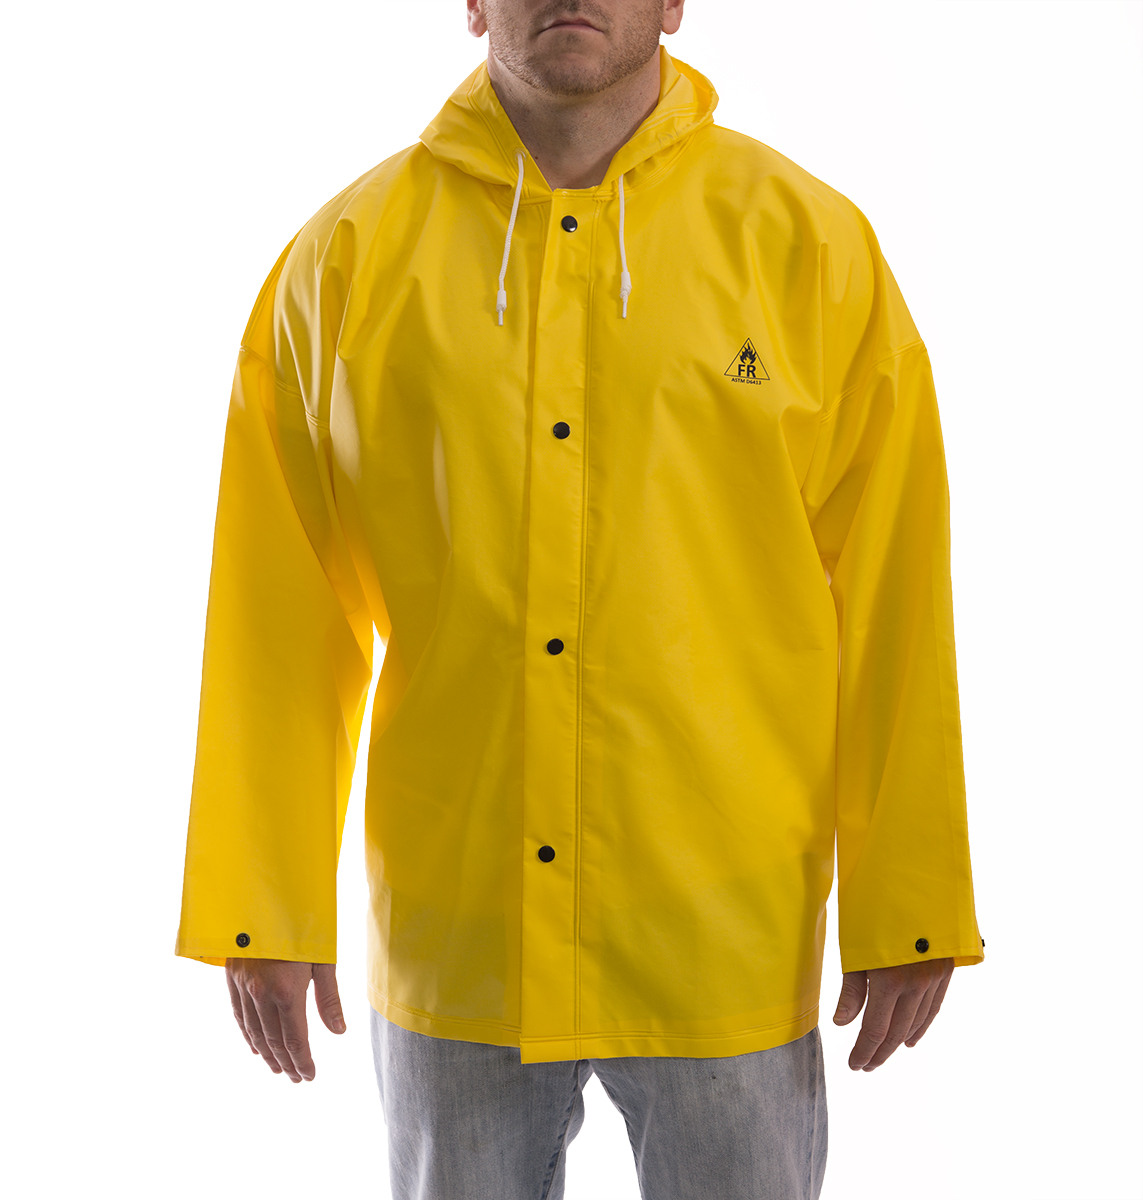 DuraScrim™ Yellow Jacket with Attached Hood